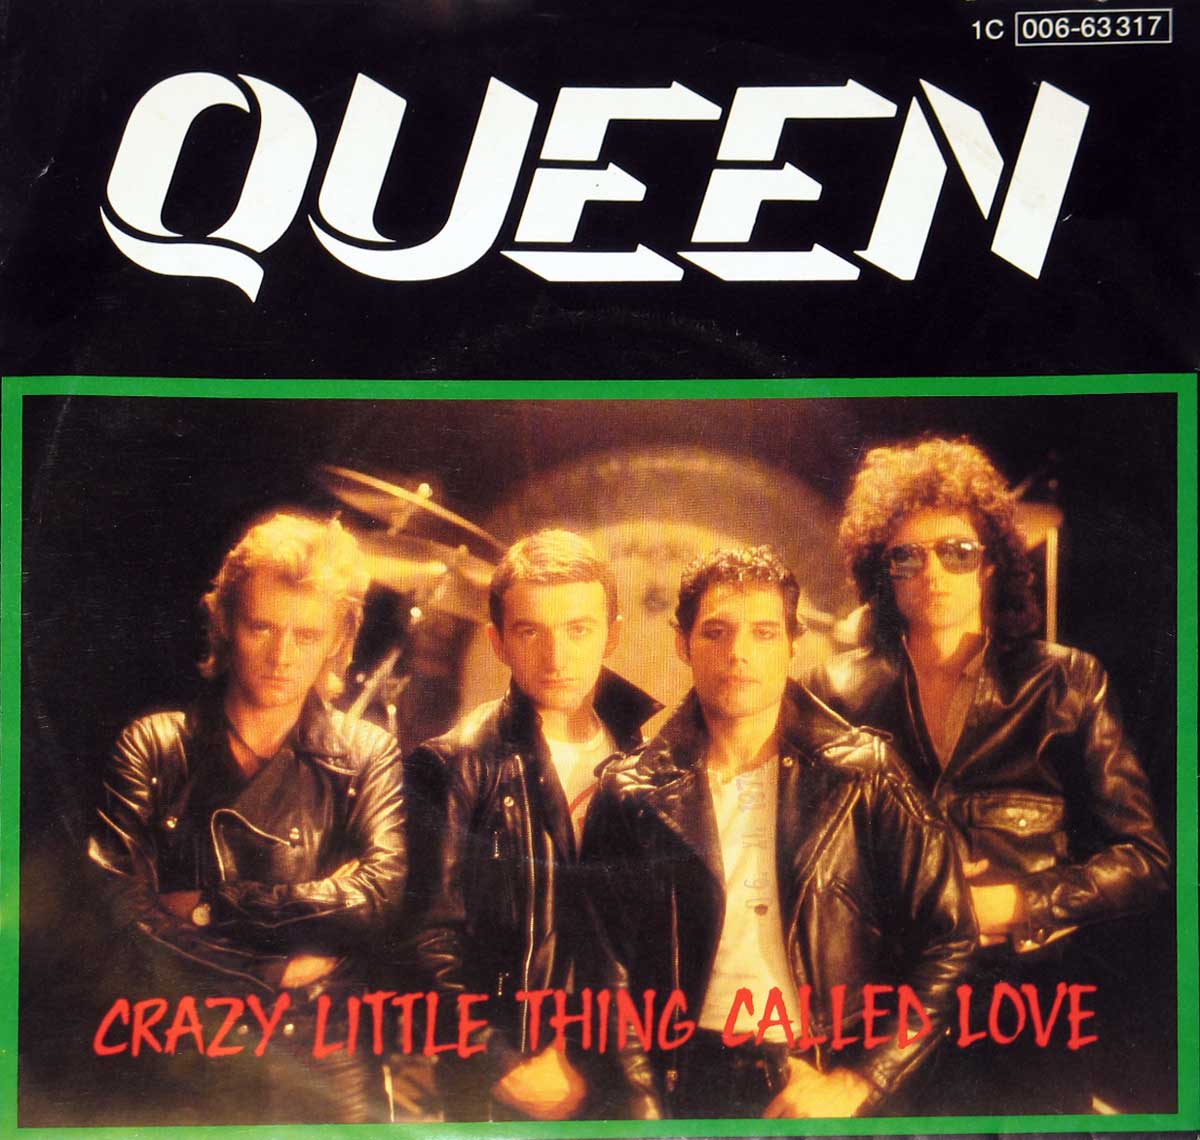 large album front cover photo of: QUEEN Crazy Little Thing Called Love 